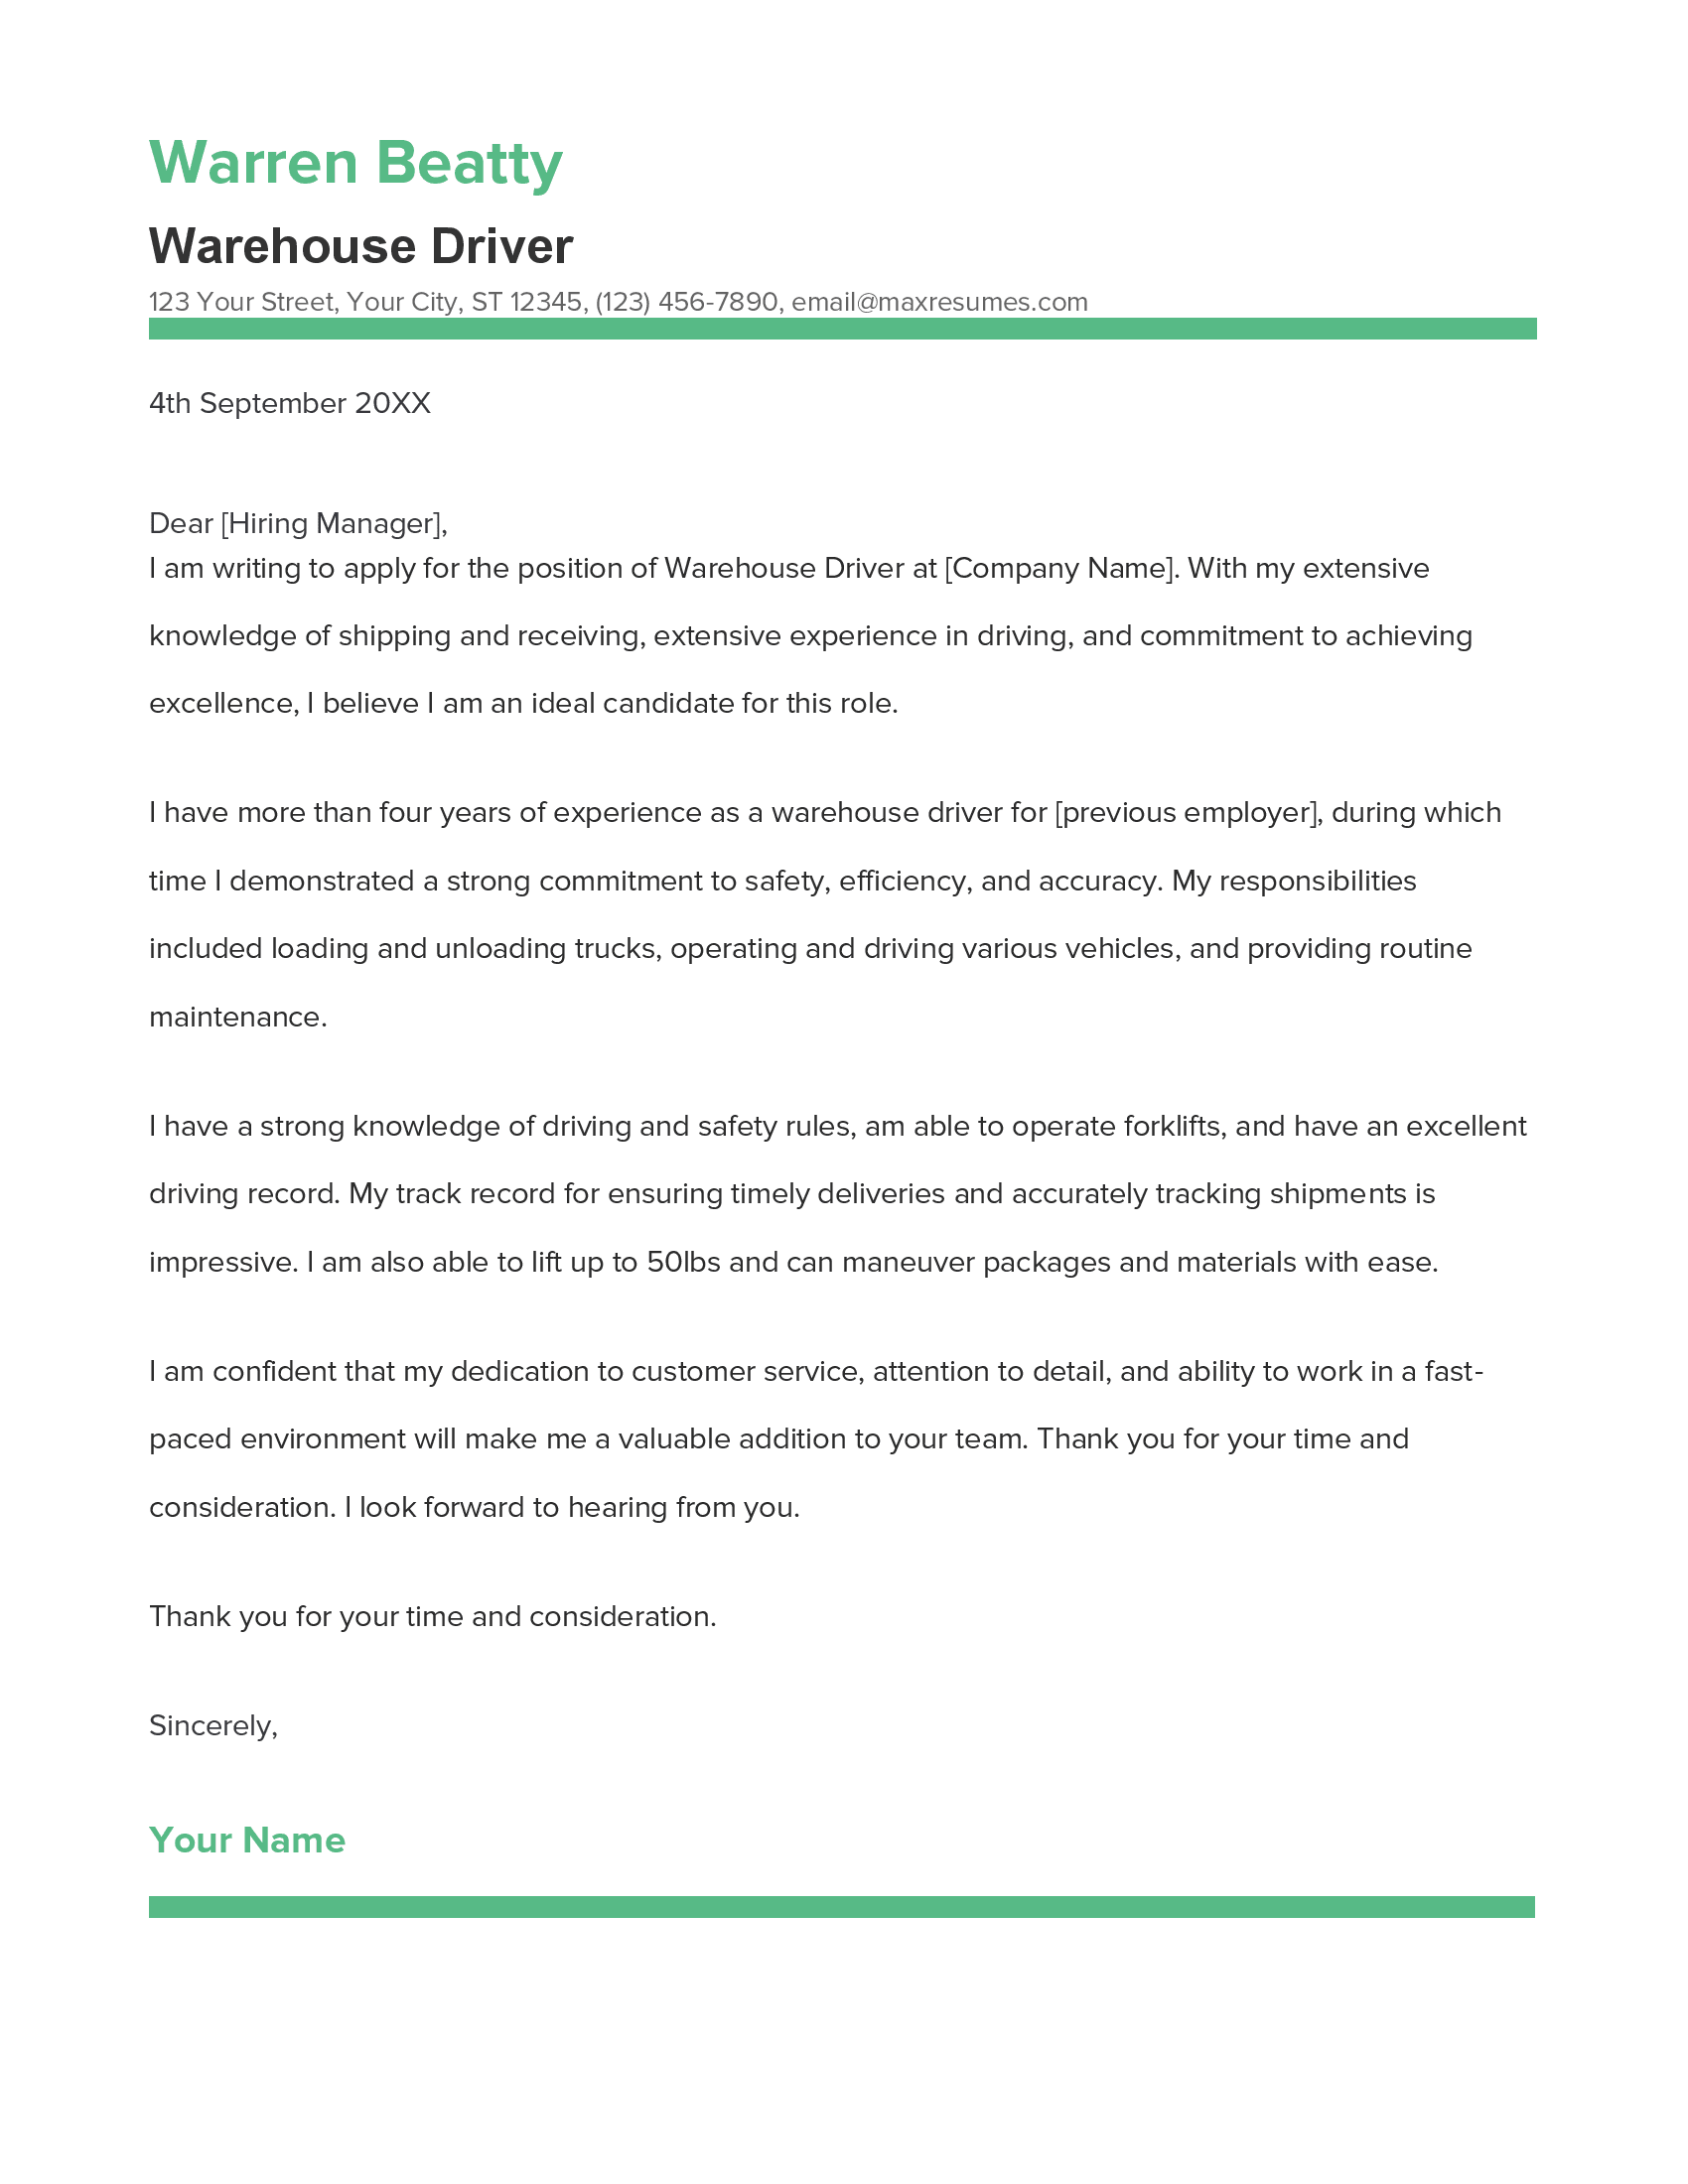 Warehouse Driver Cover Letter Example